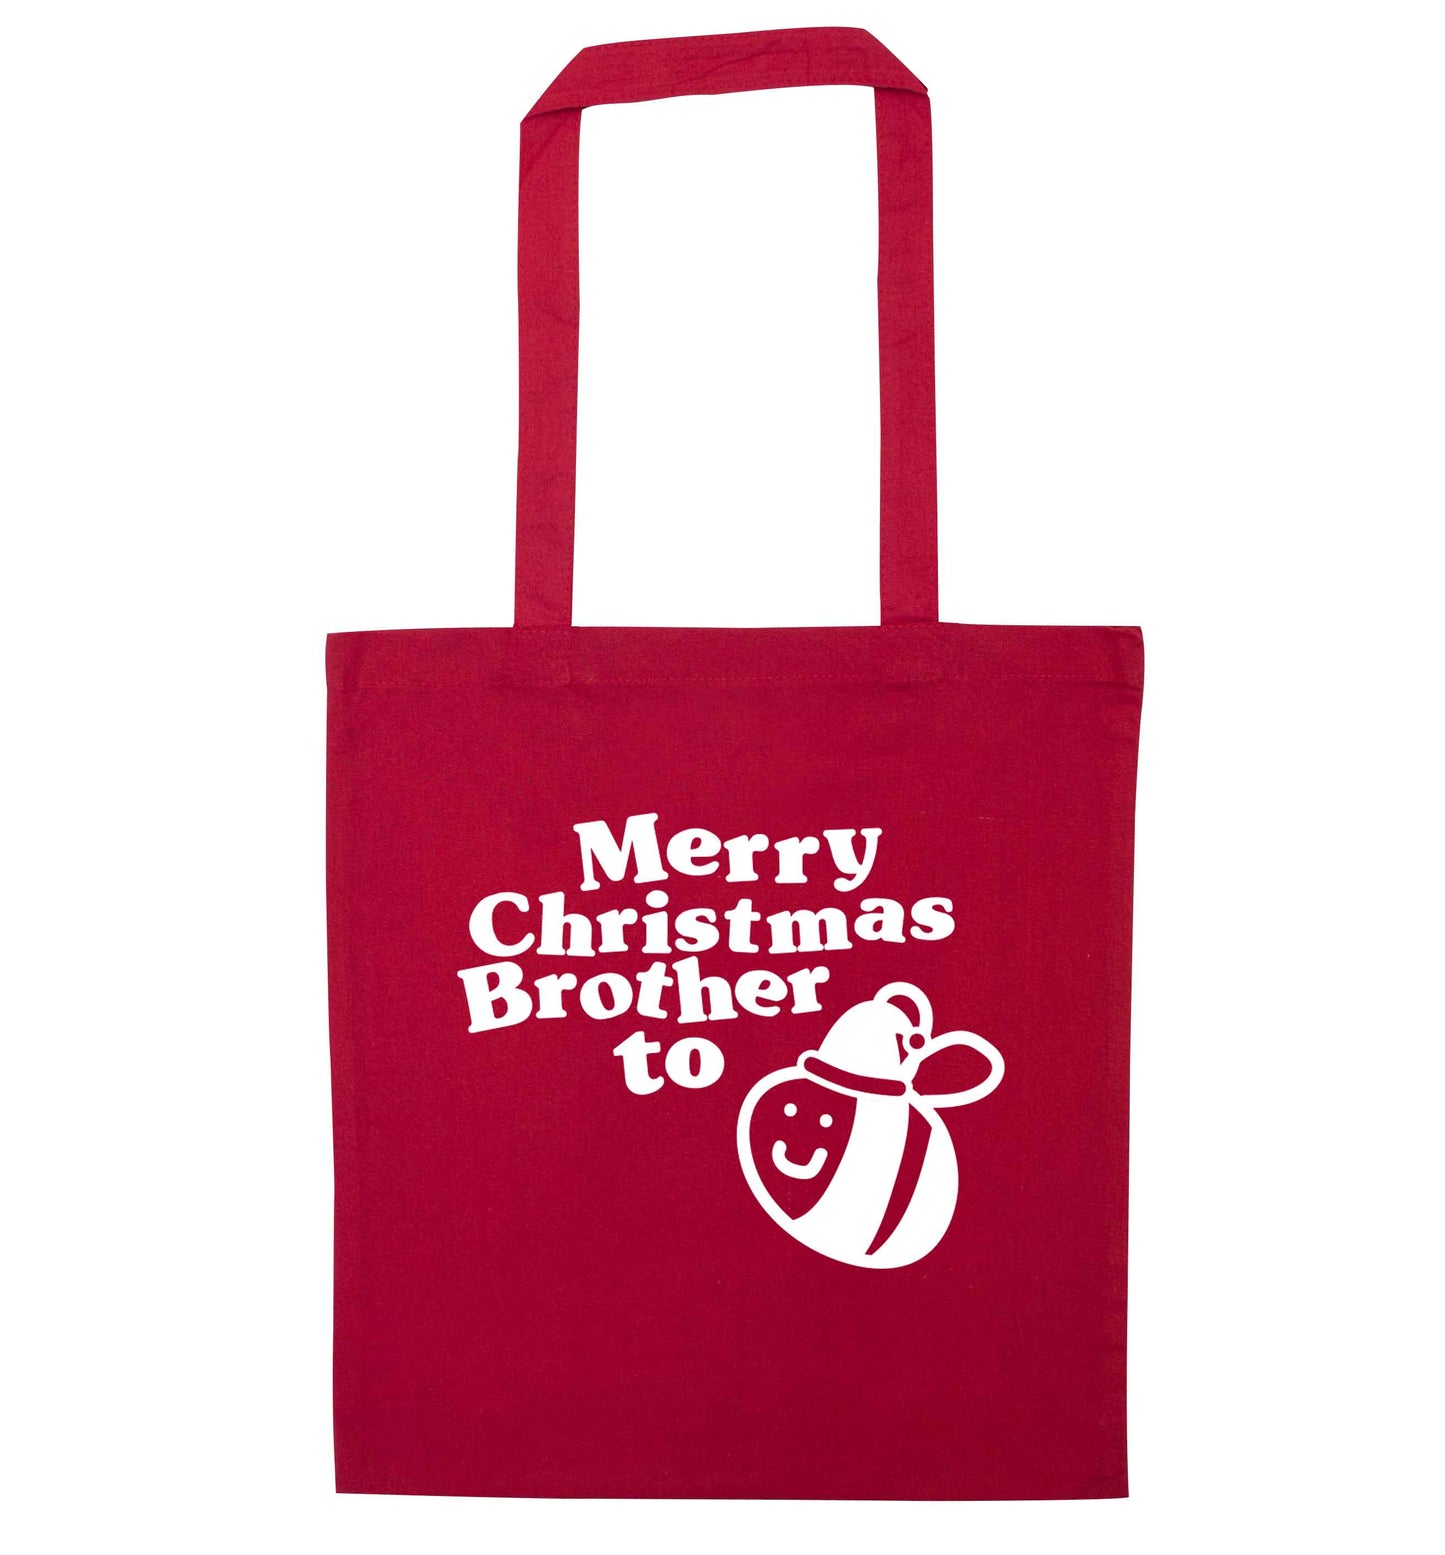 Merry Christmas brother to be red tote bag